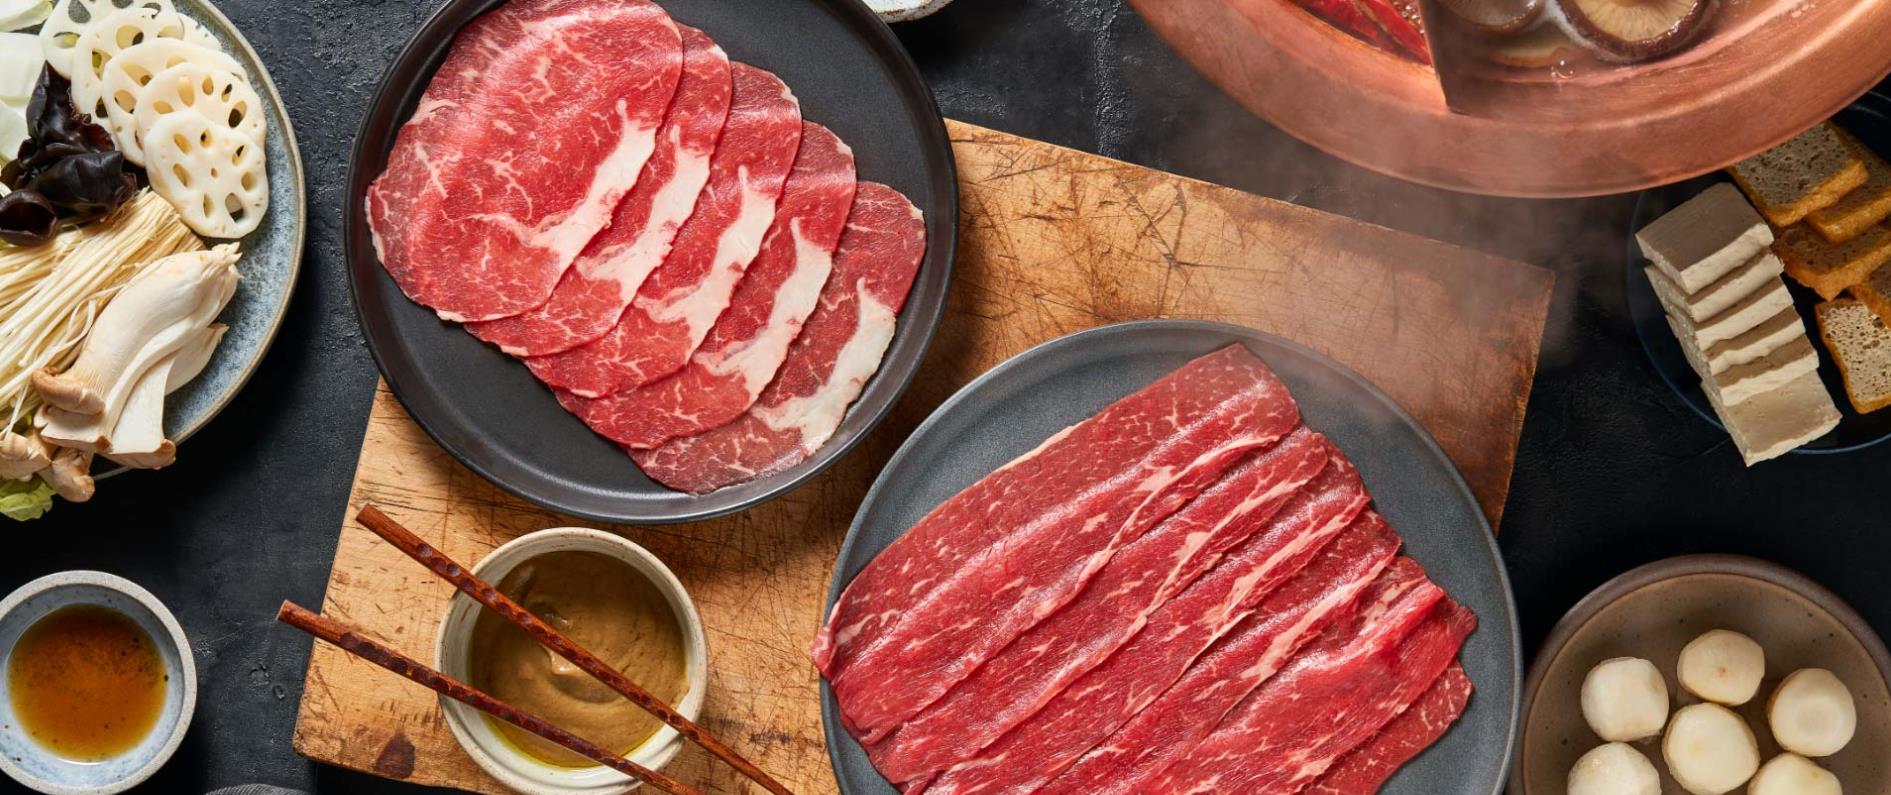 Bringing Authenticity to One of the World’s Leading Meat Brands